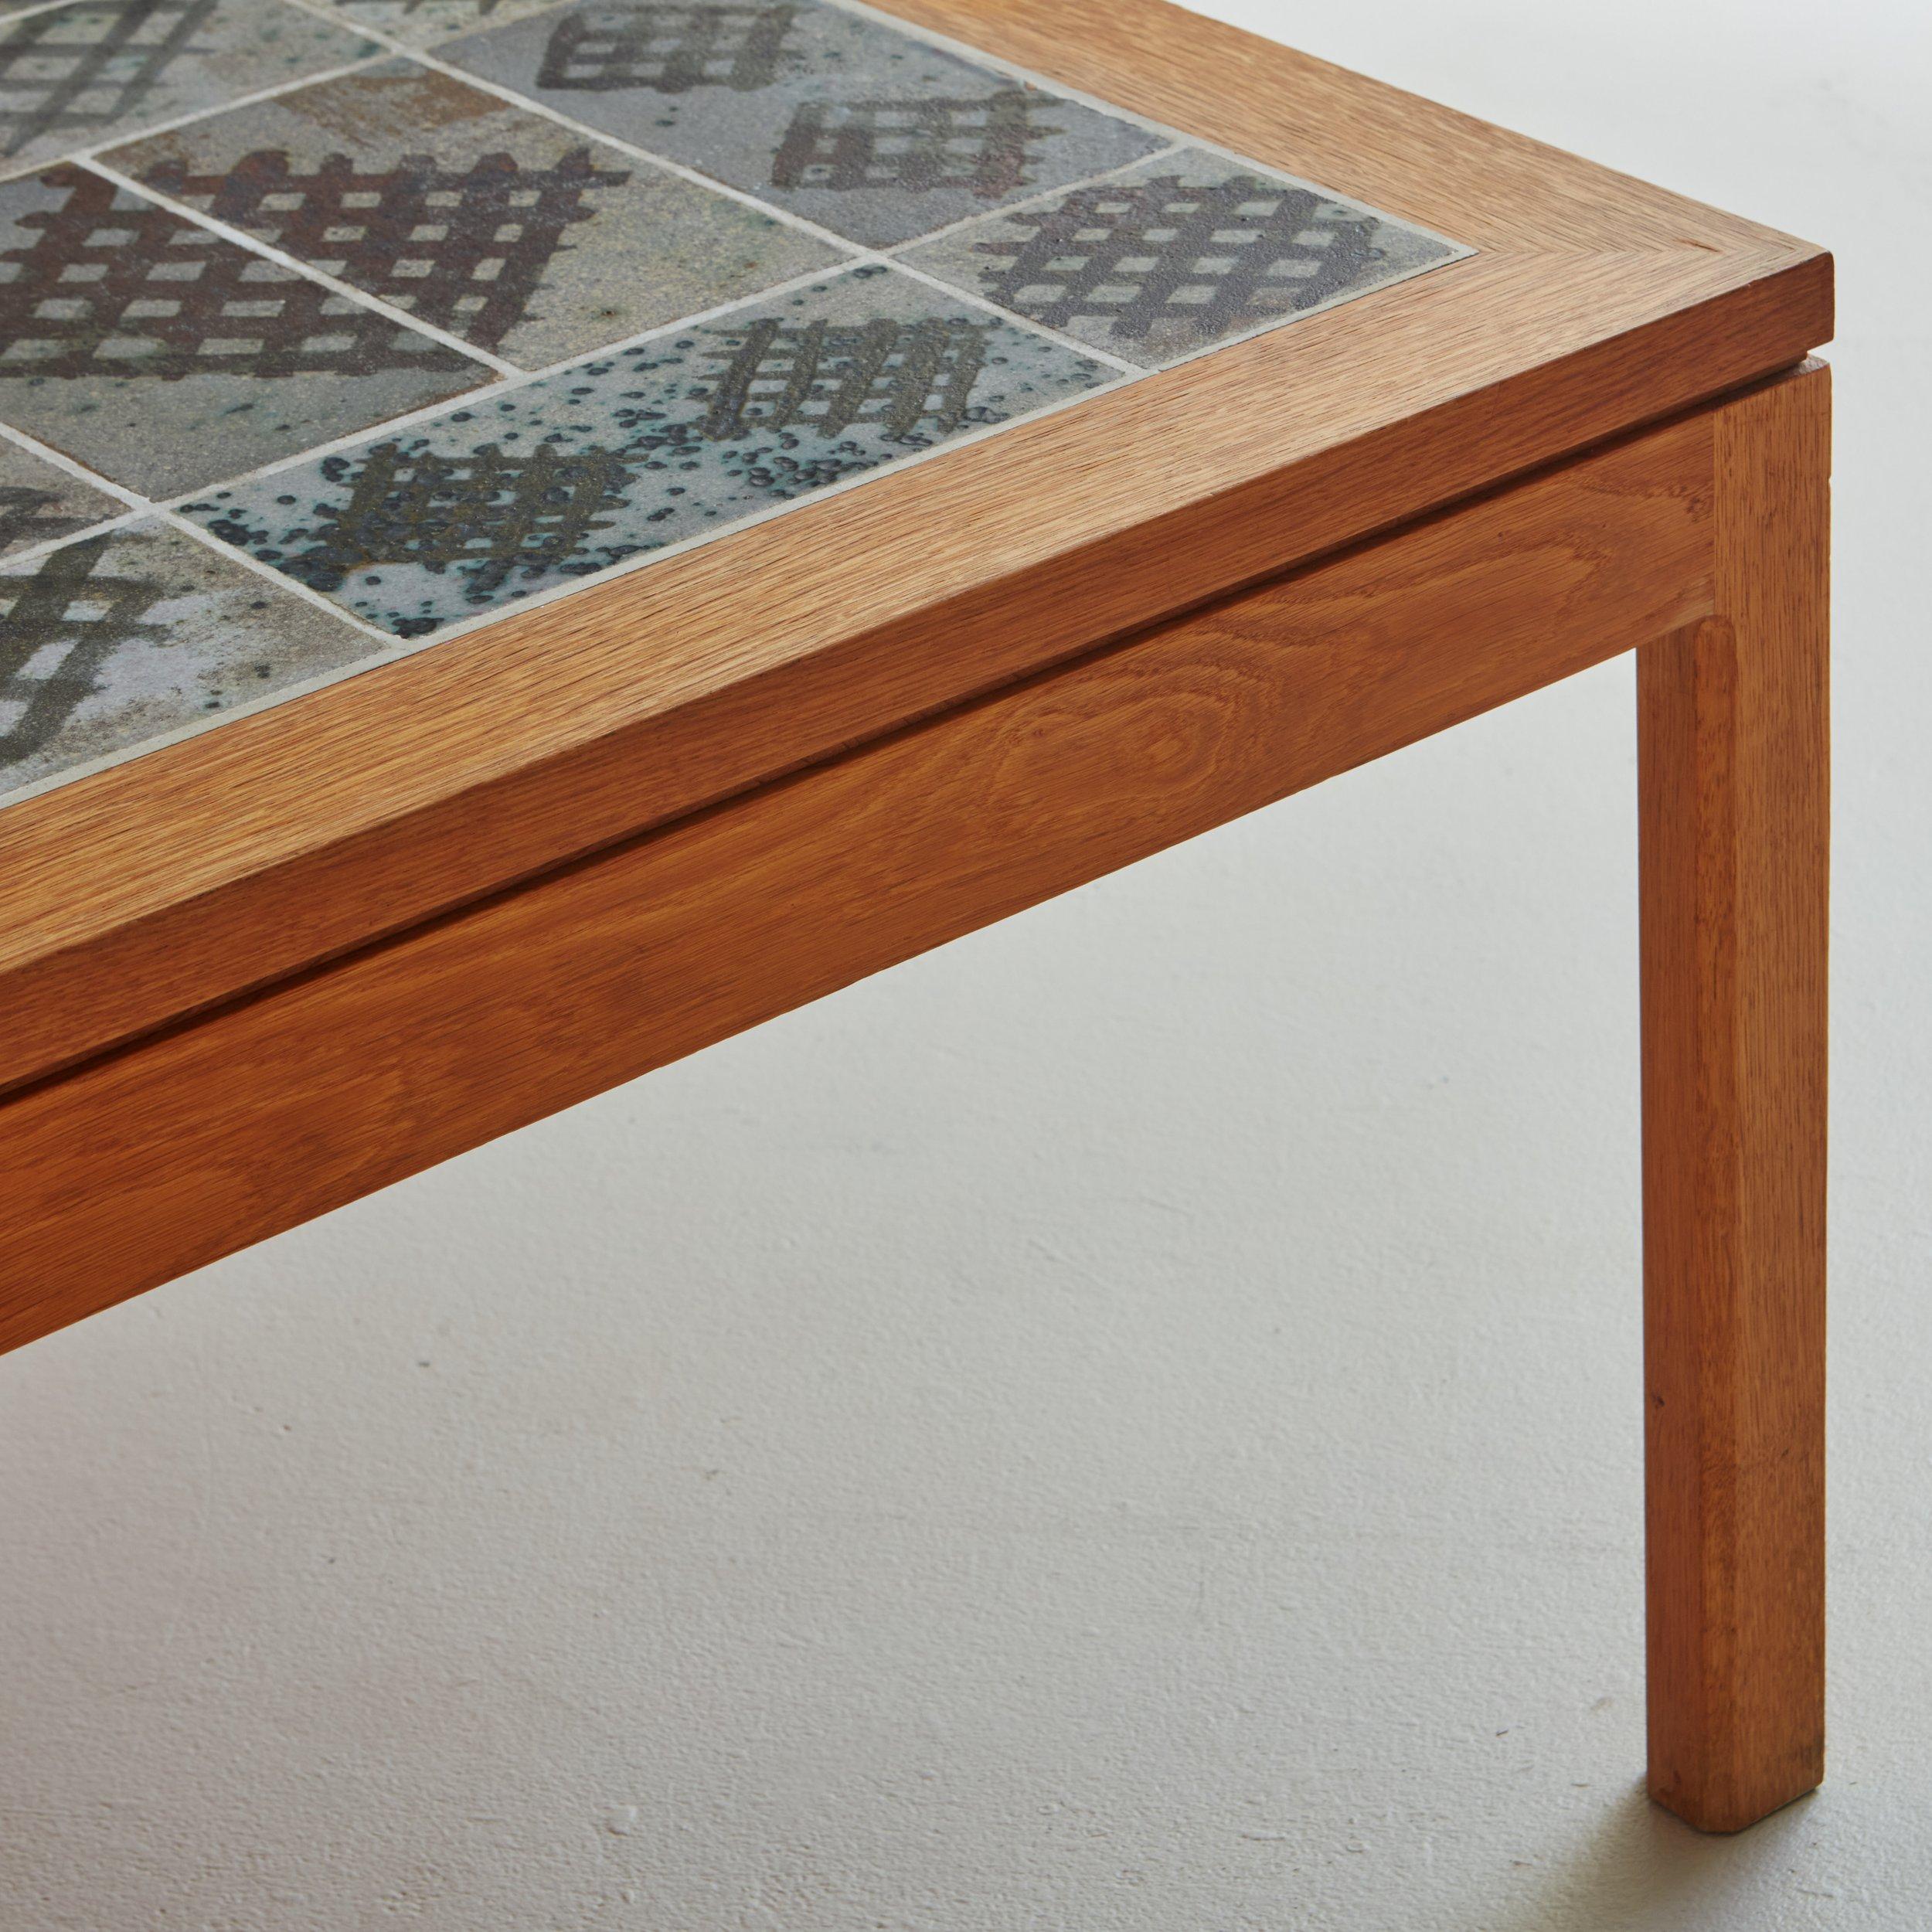 Late 20th Century Oak + Tile Coffee Table by Tue Poulsen, Denmark 1970s For Sale